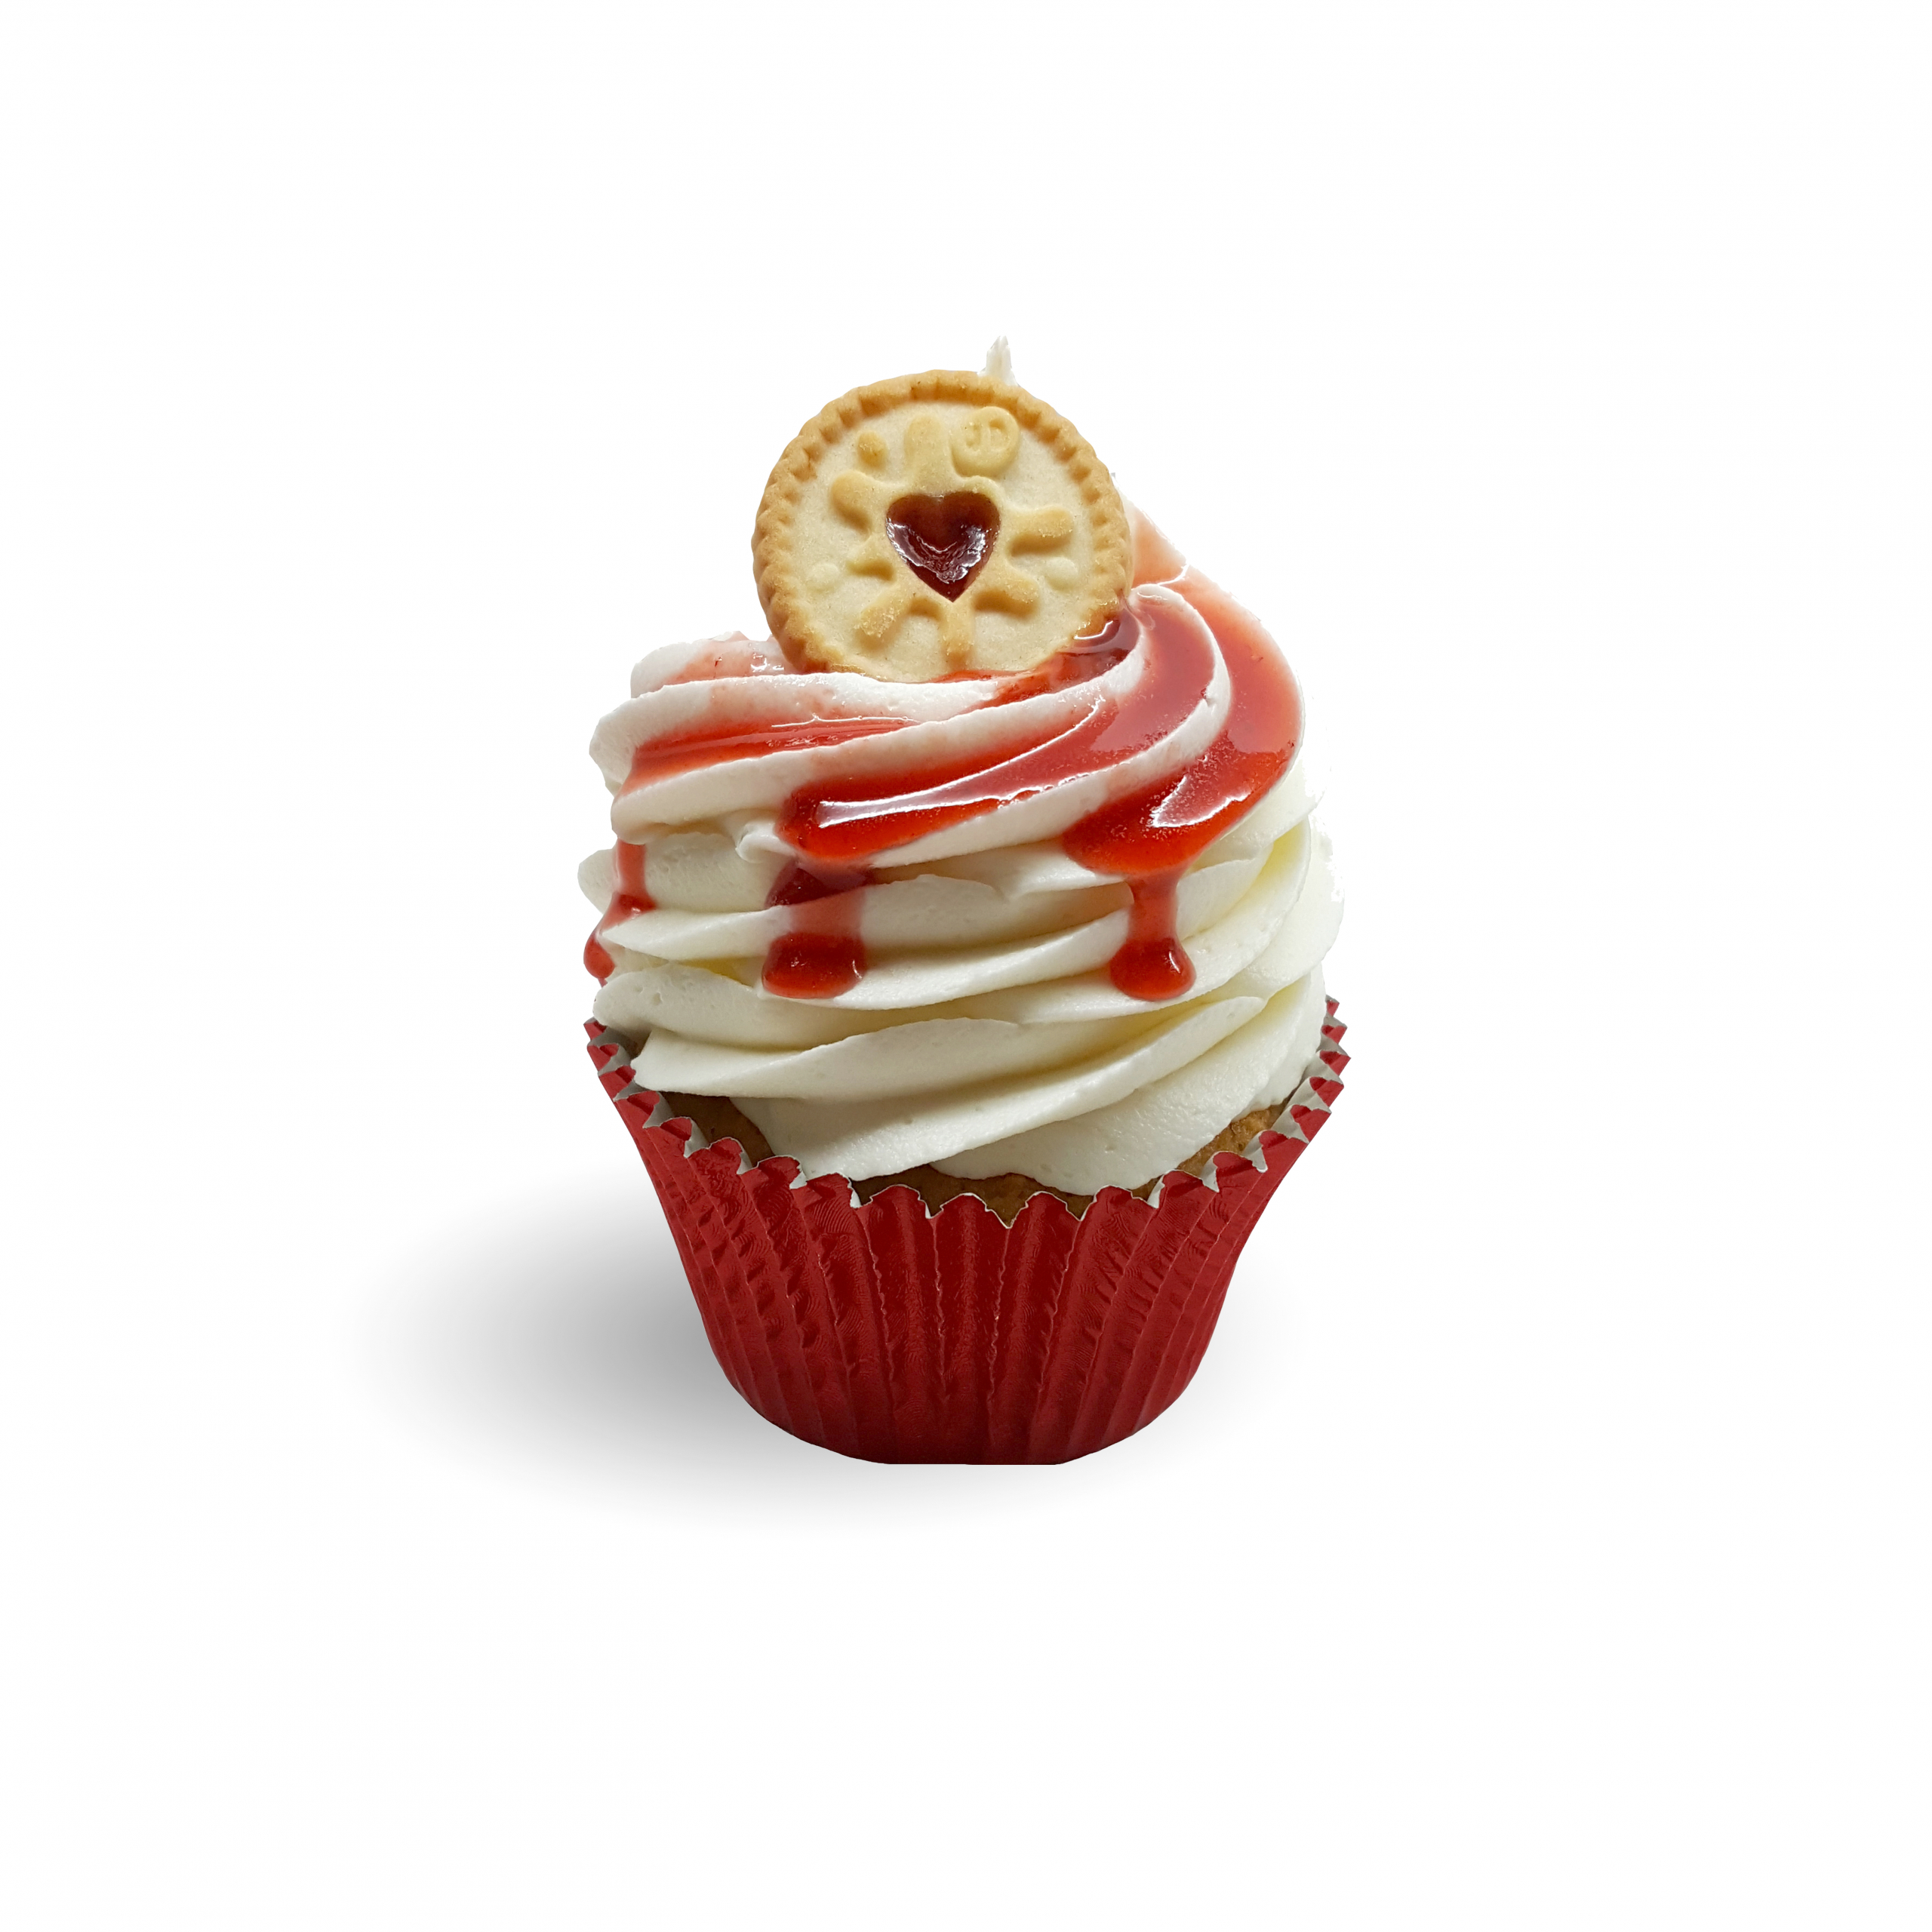 Sumptuous Madagascan bourbon vanilla cupcake oozing with French strawberry ...